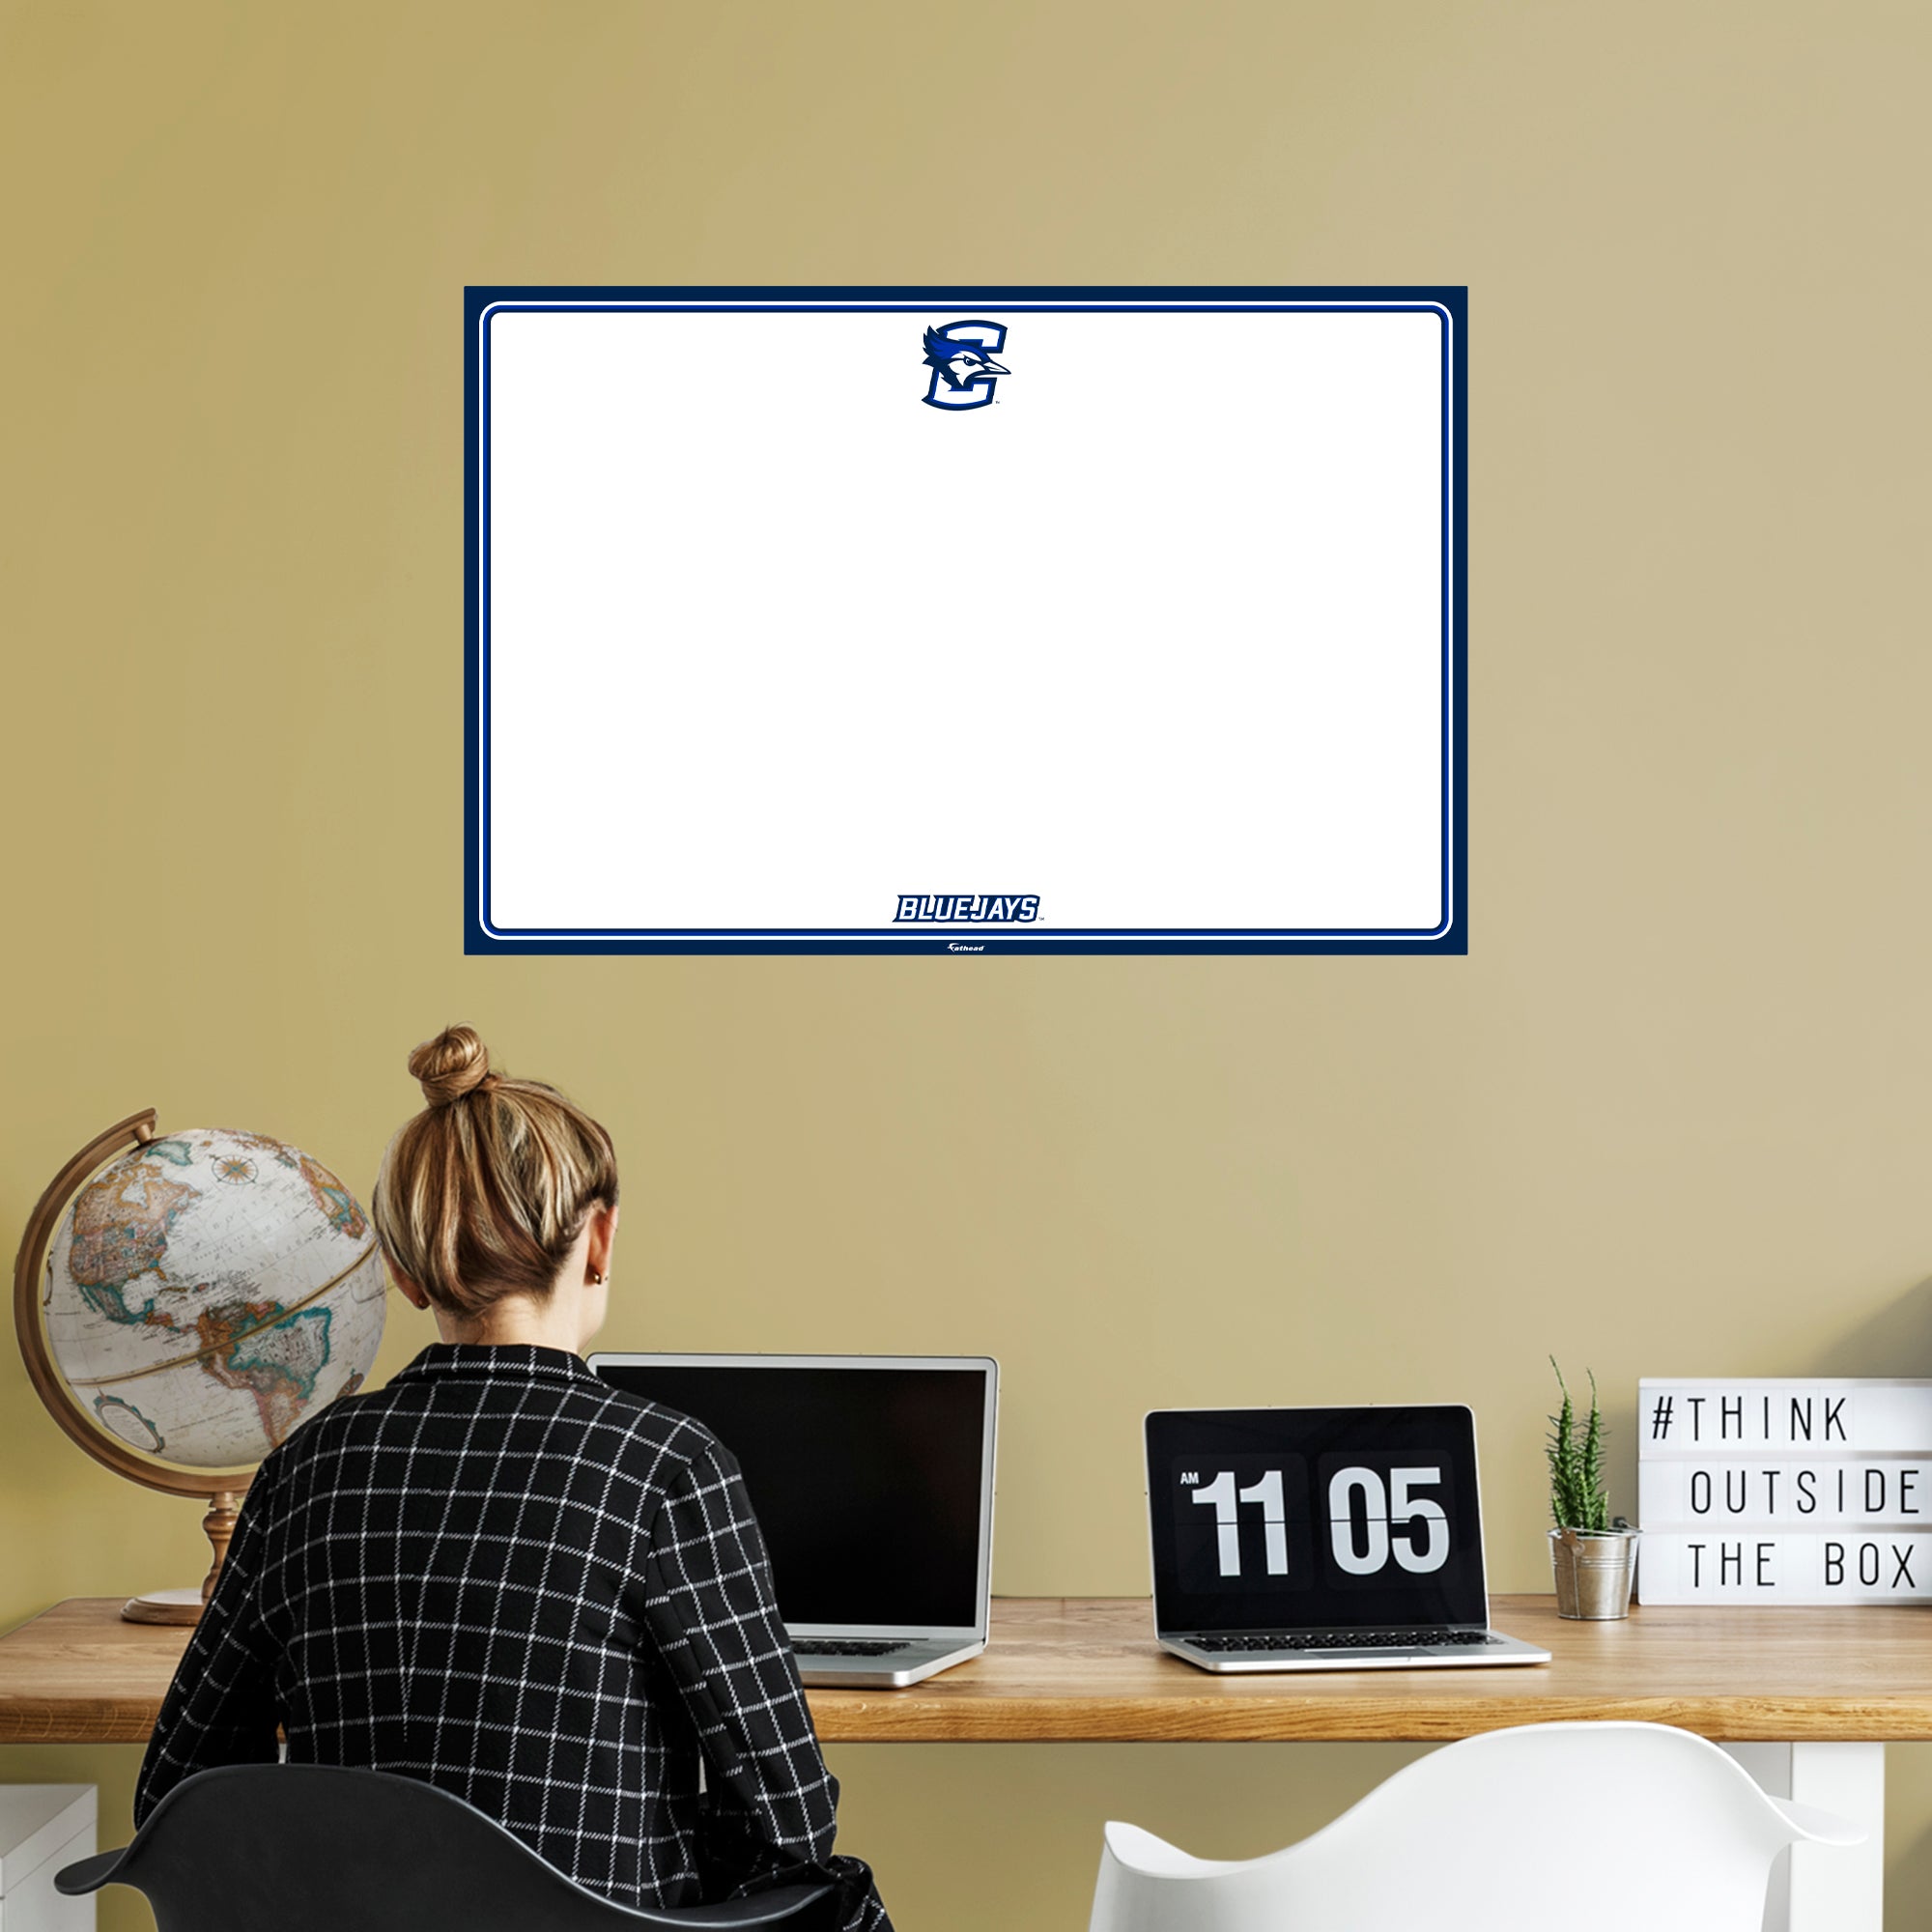 Creighton Blue Jays 2020 X-Large Dry Erase Whiteboard - Officially Licensed NCAA Removable Wall Decal XL by Fathead | Vinyl